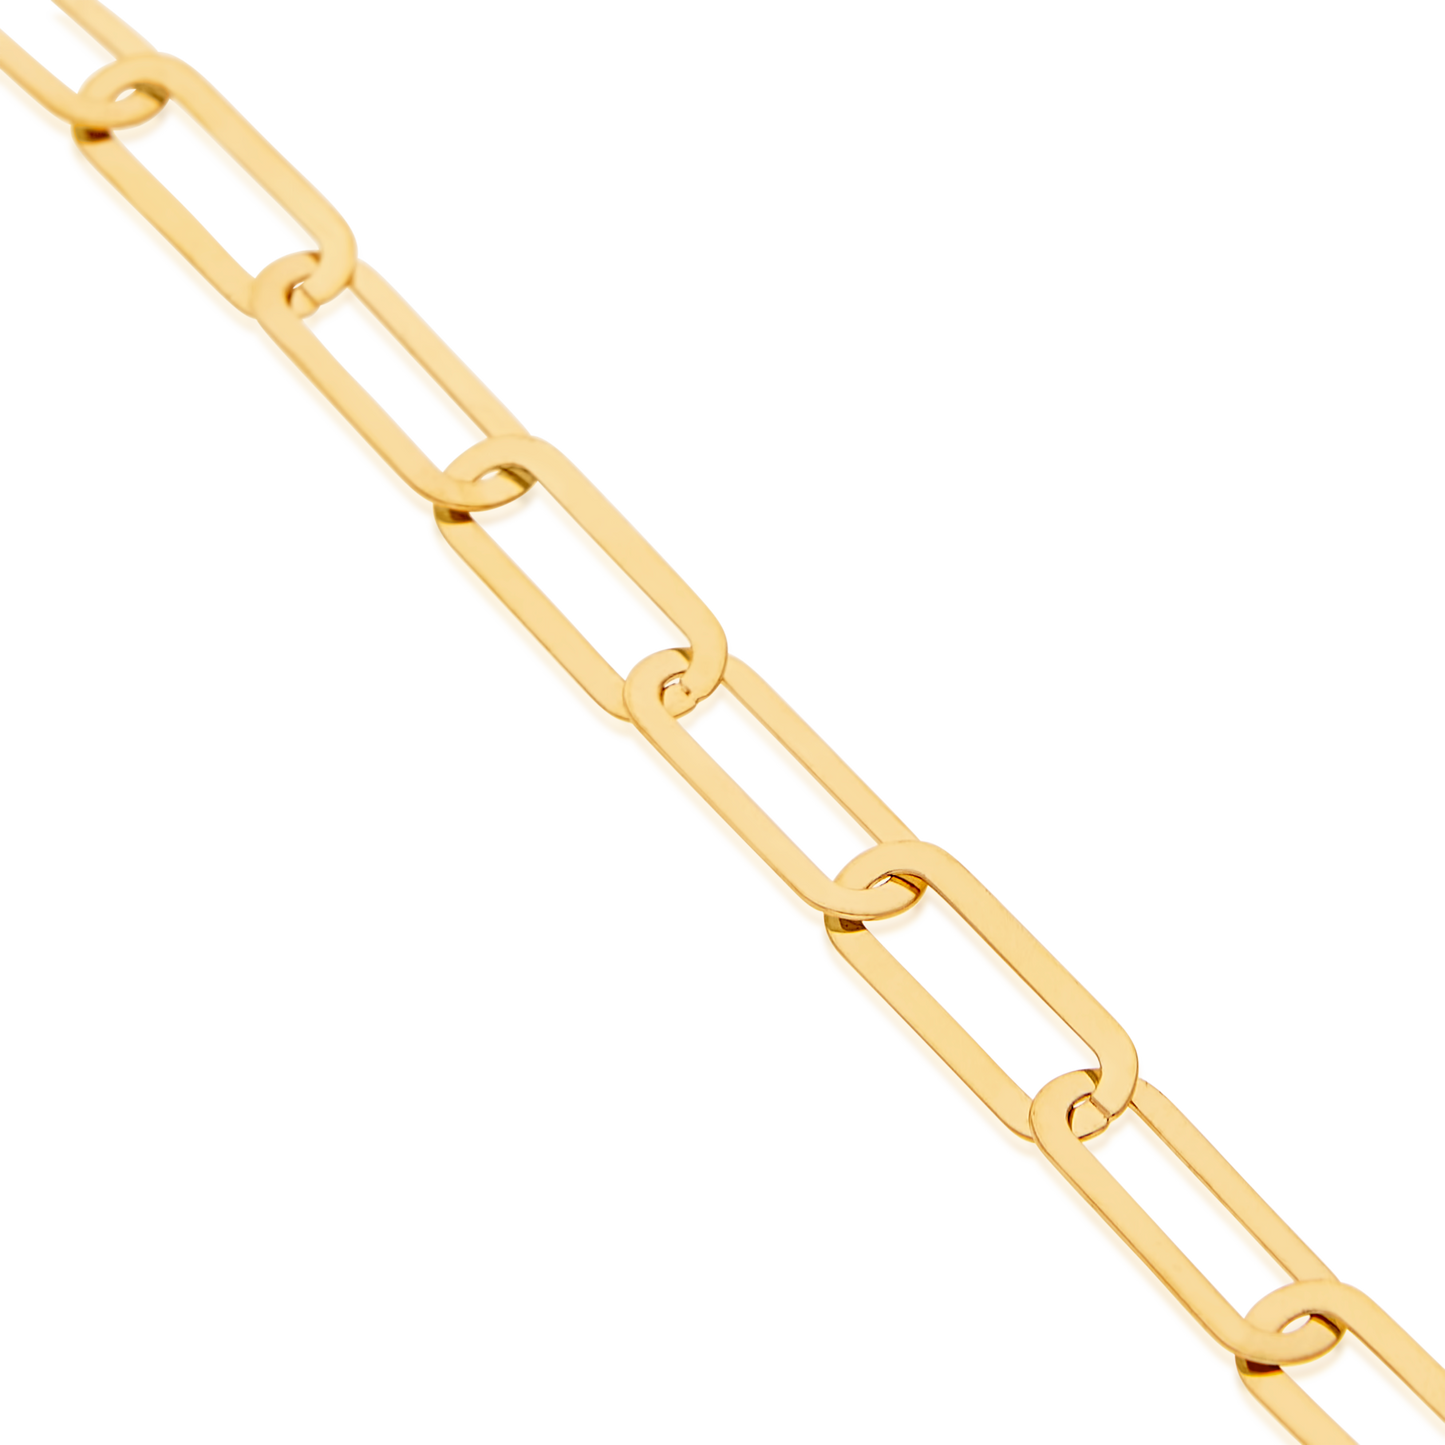 9ct Yellow Gold Oval Link Necklace